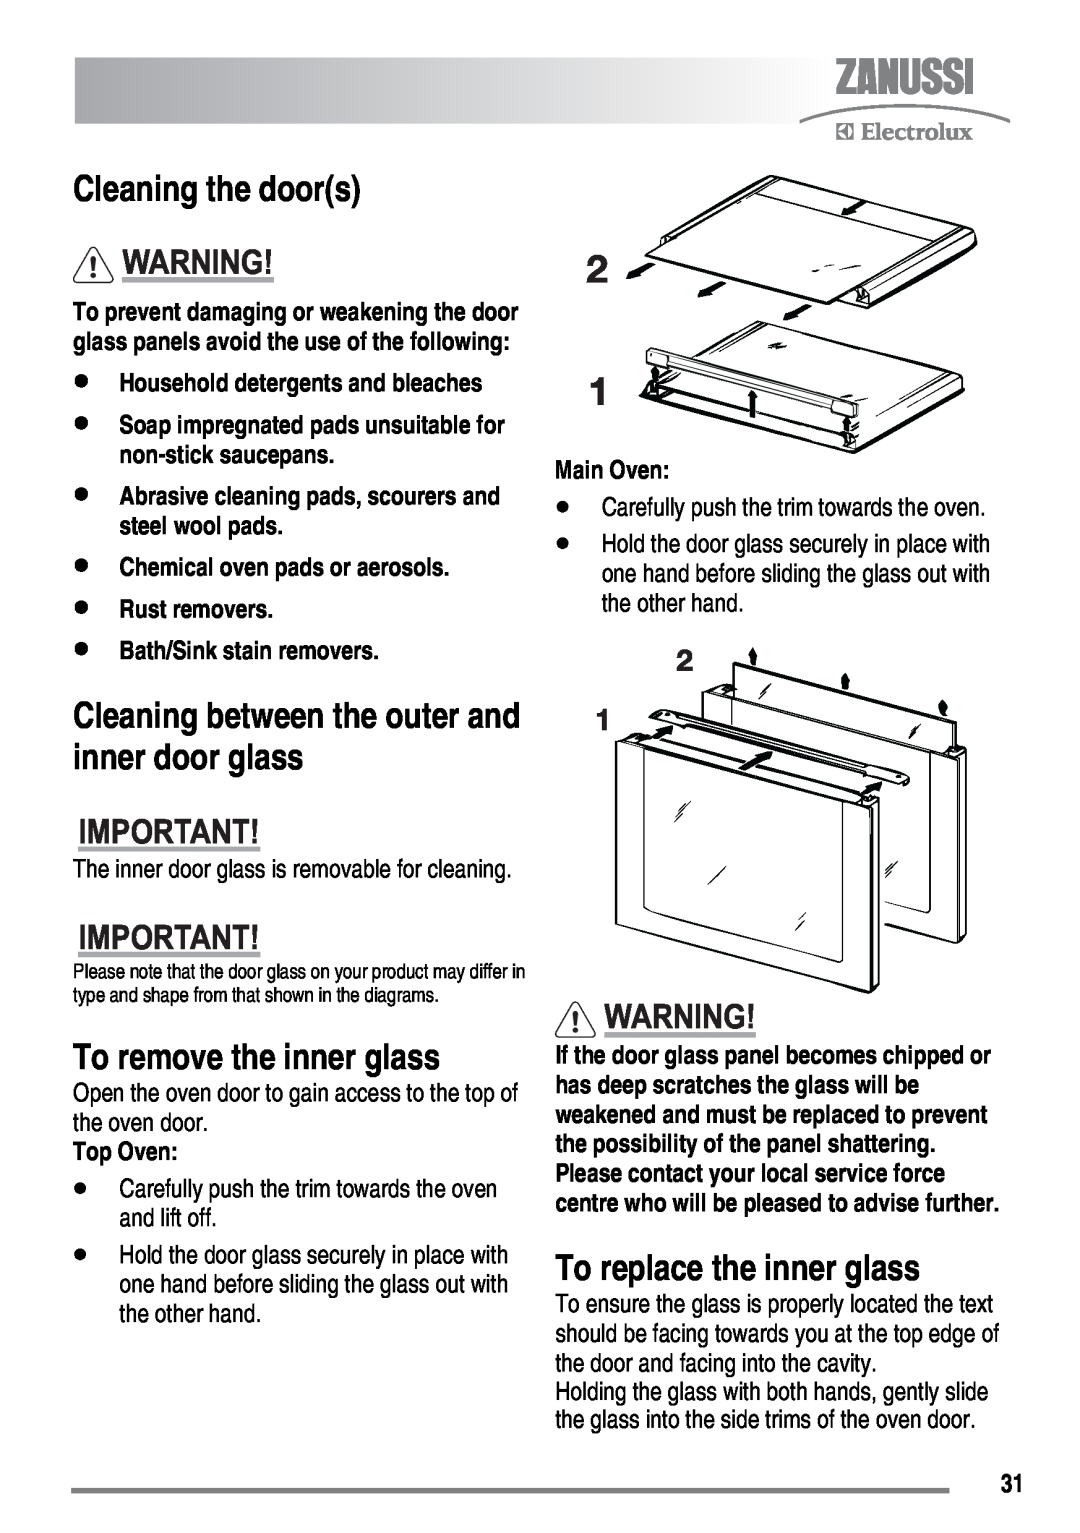 Zanussi ZKM6040 user manual Cleaning the doors, To remove the inner glass, To replace the inner glass, Top Oven, Main Oven 